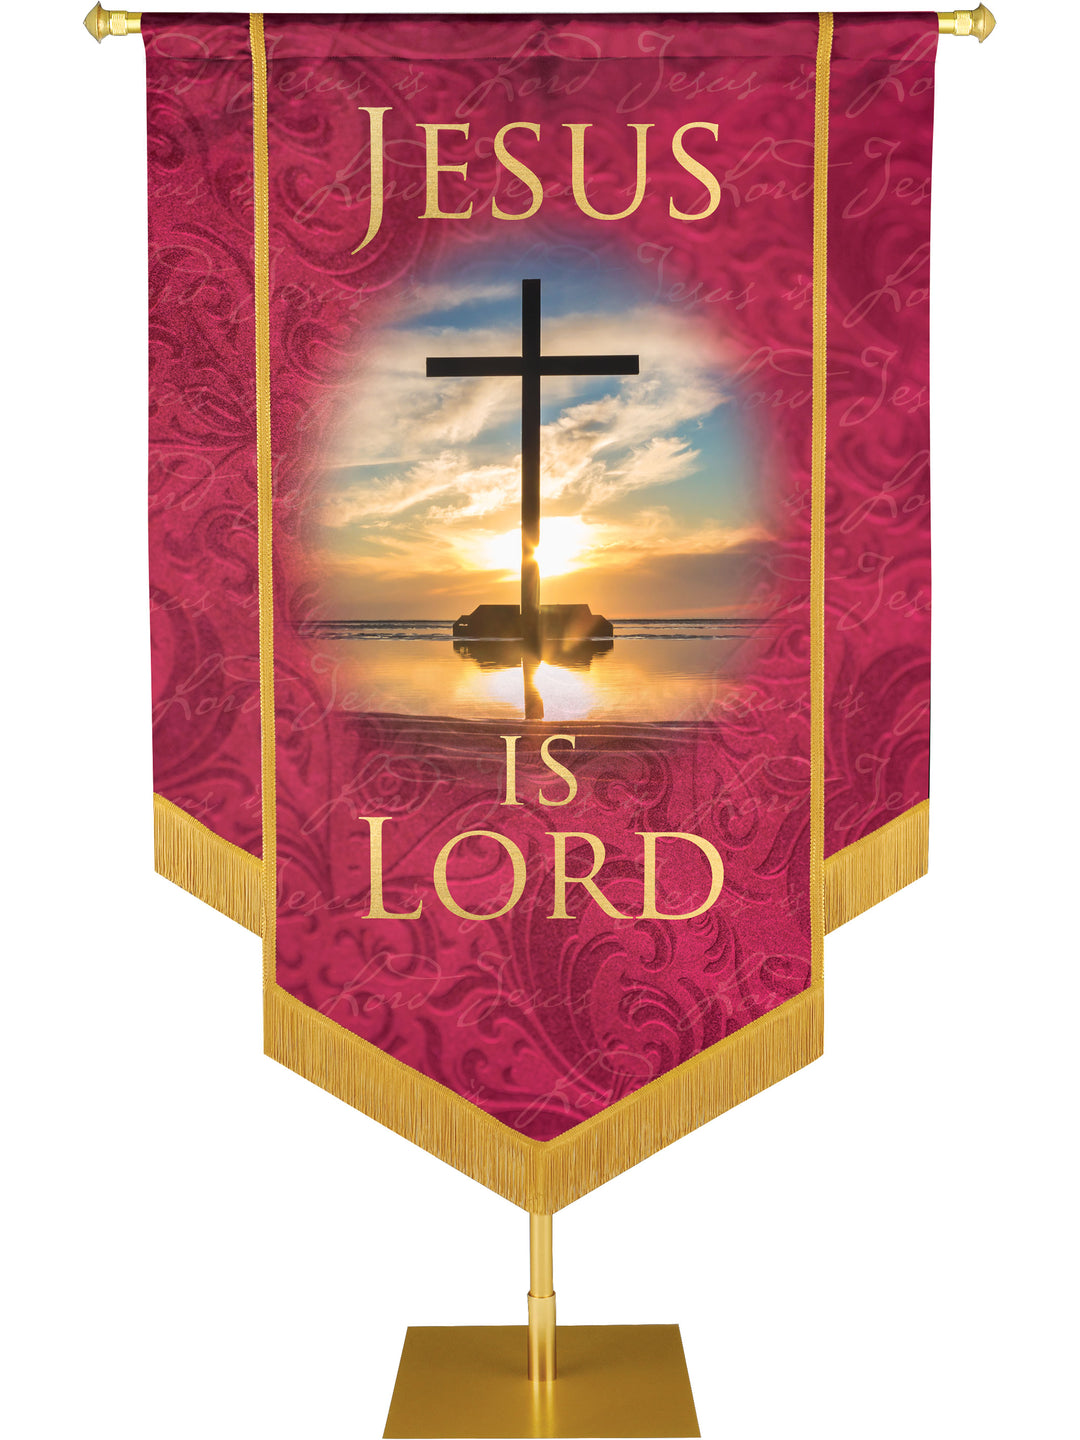 Names of Christ Jesus Is Lord Embellished Banner - Handcrafted Banners - PraiseBanners